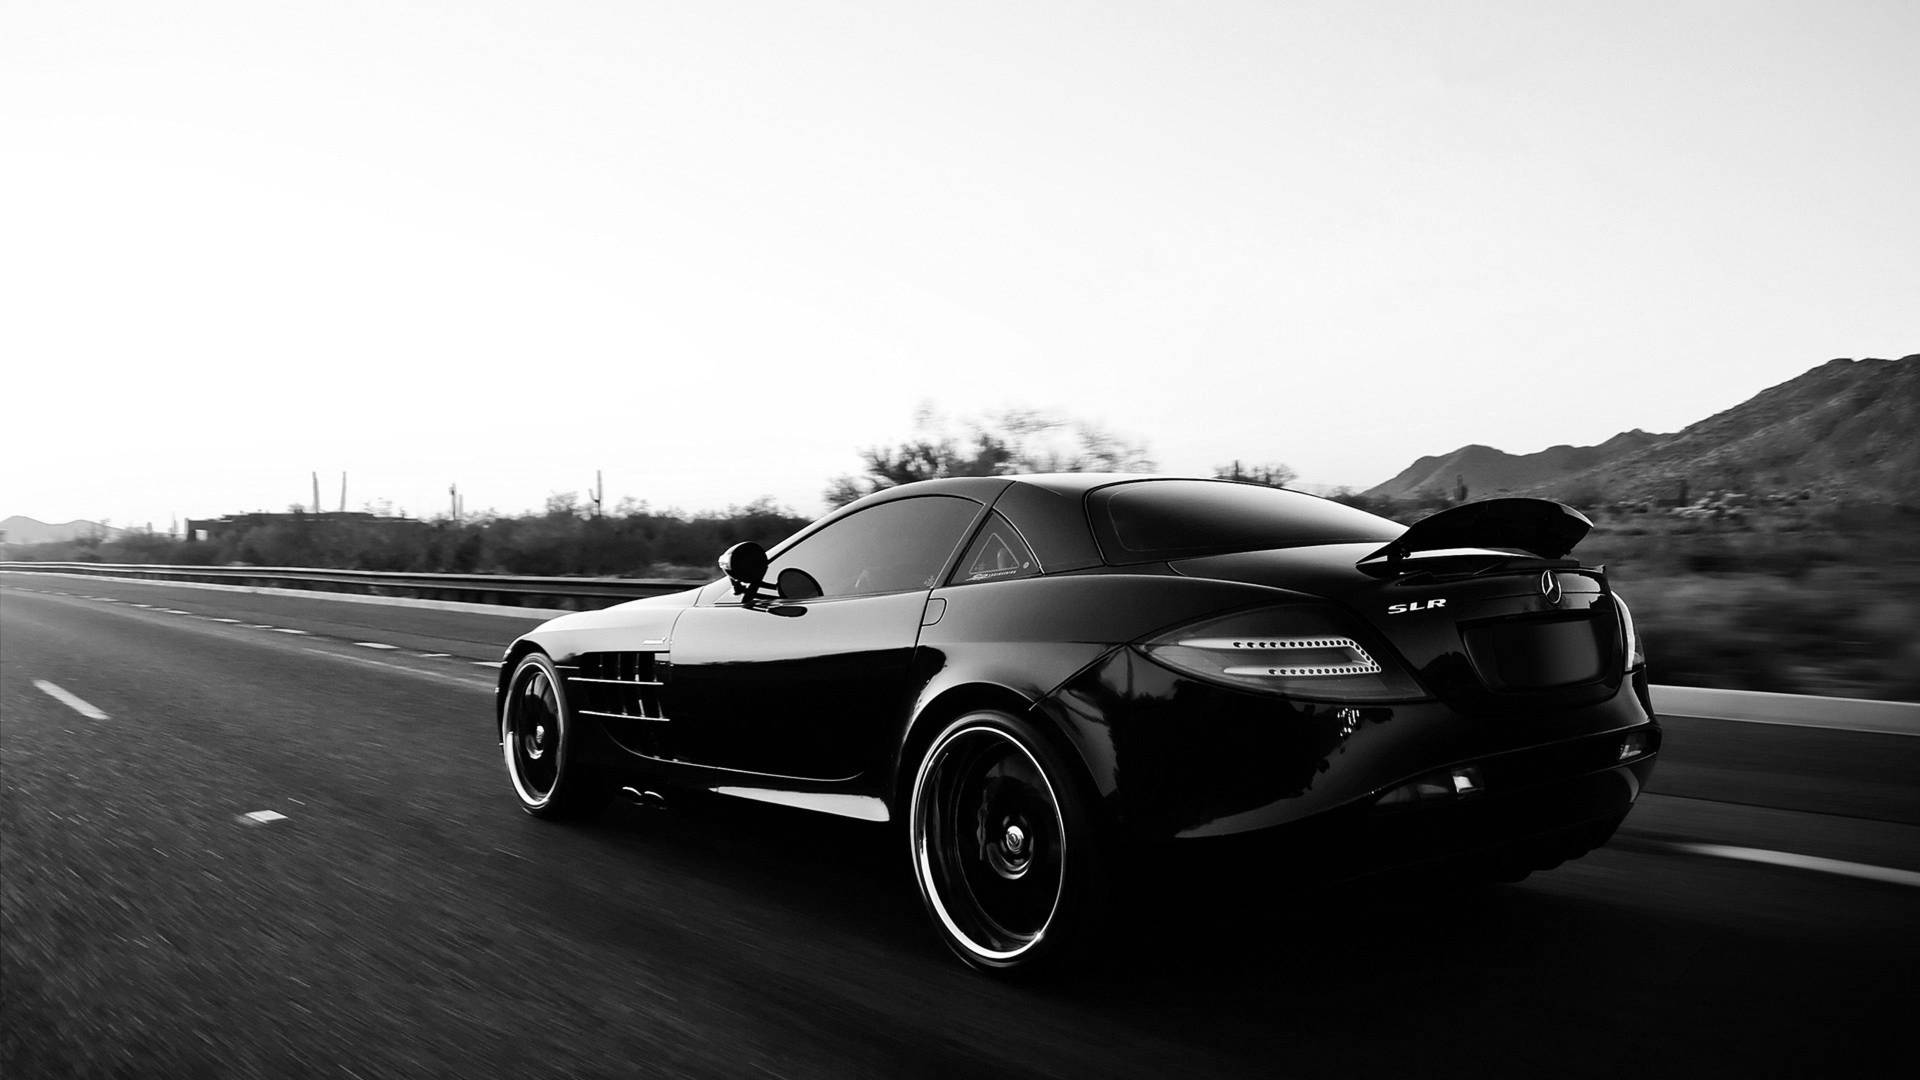 4k Black And White Car On Road Background